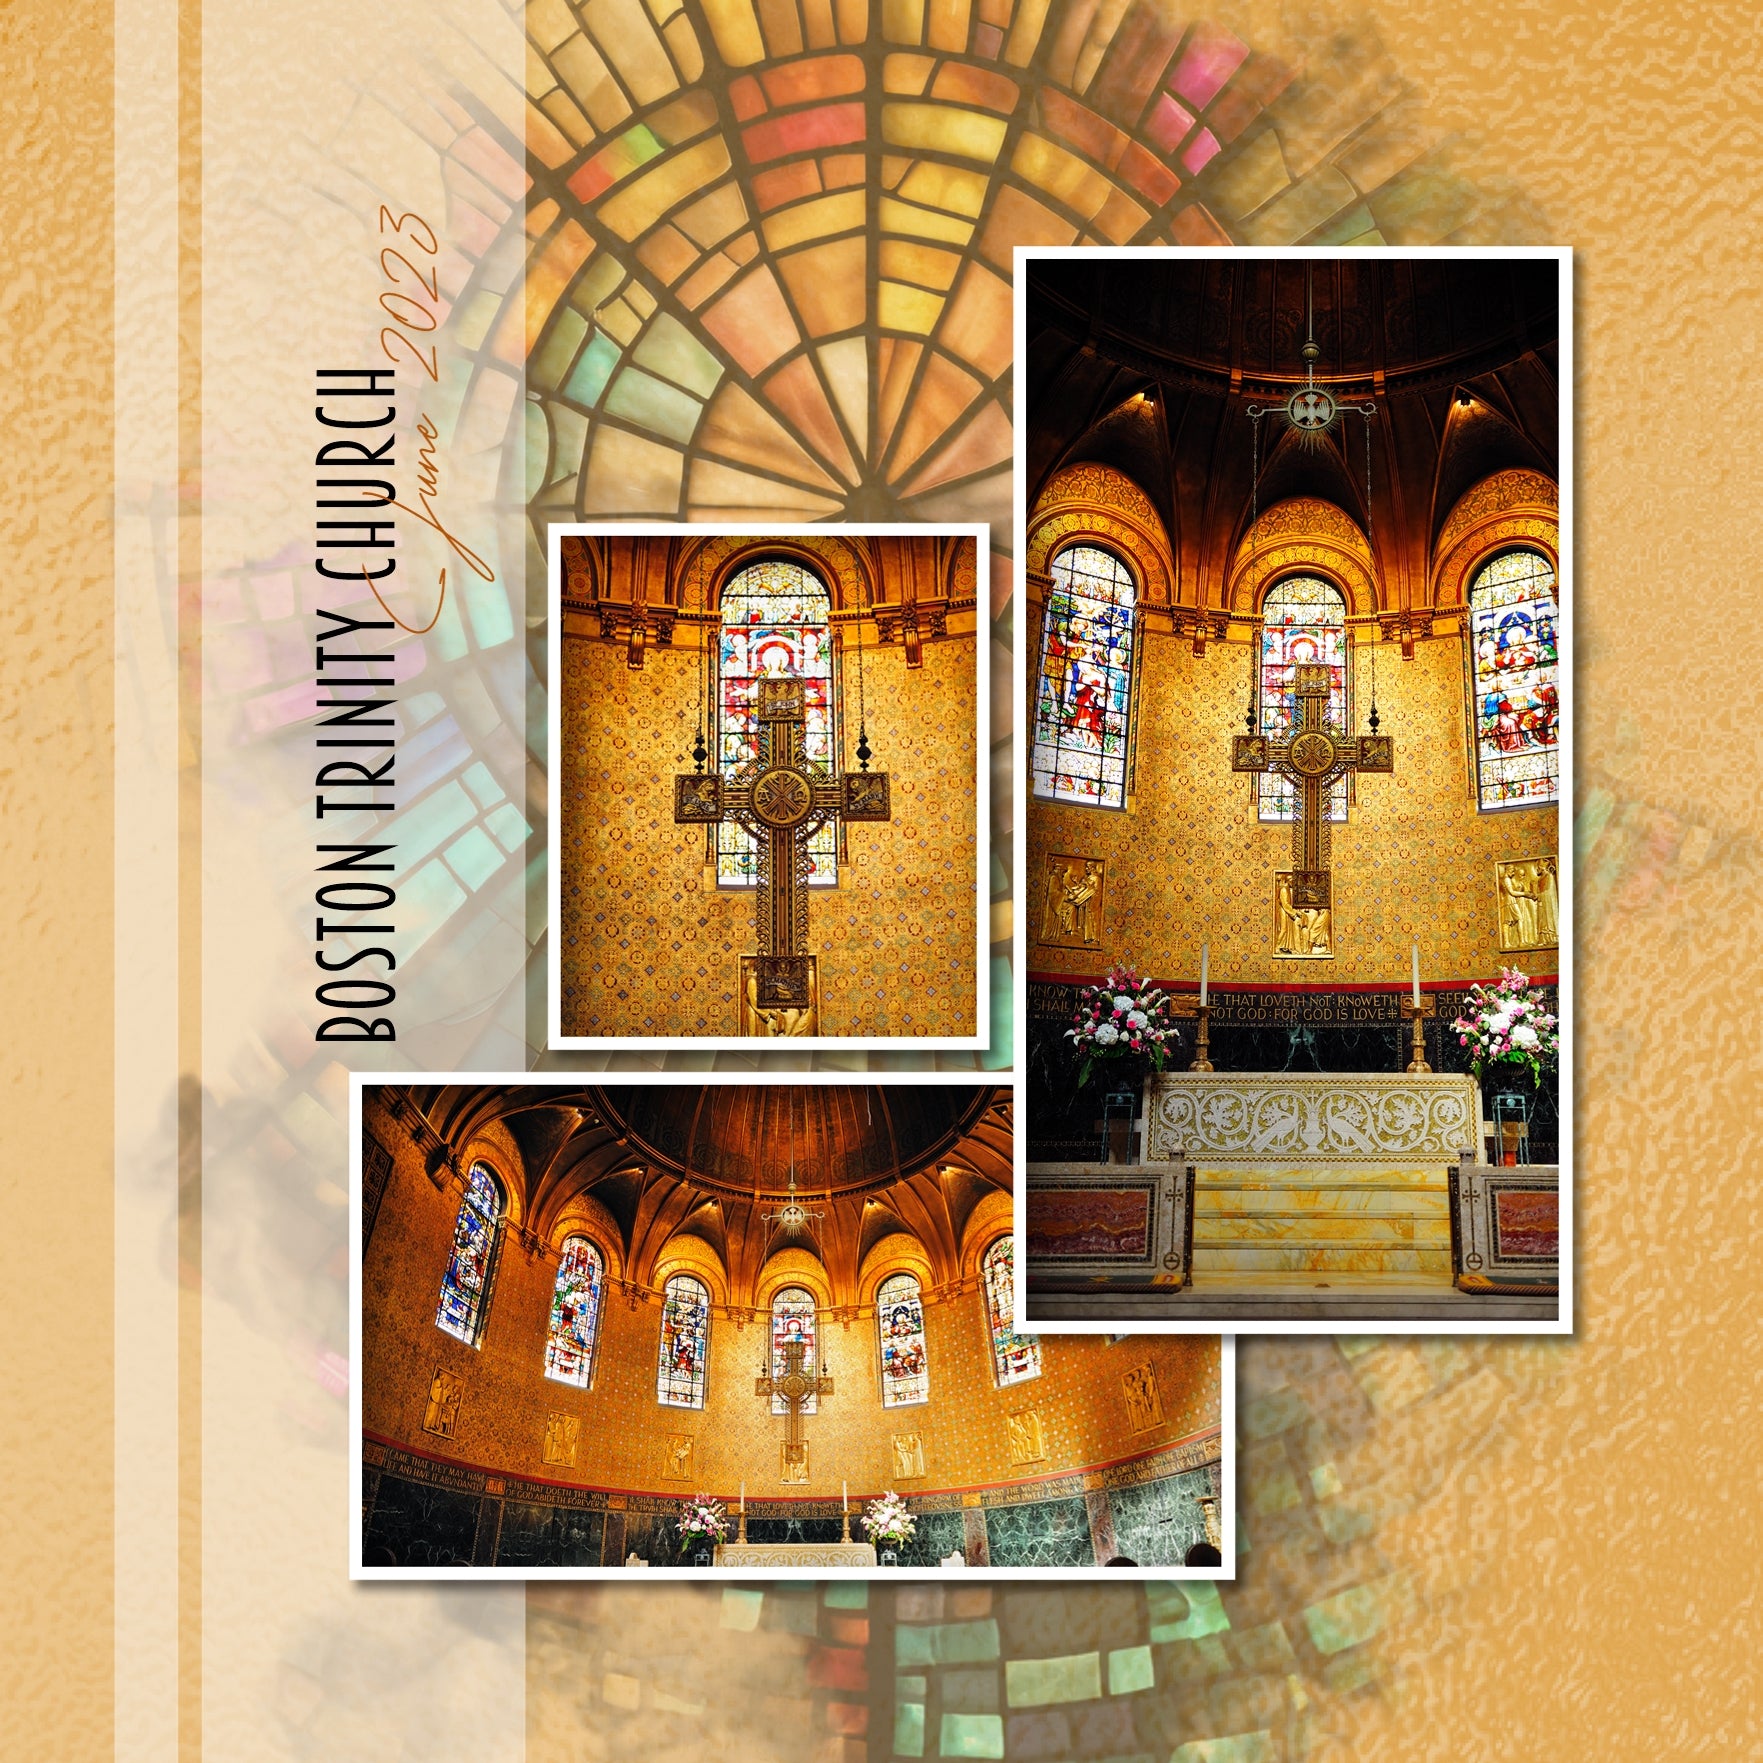 These beautiful and ornate digital scrapbooking stained glass window frames, digital papers, and masked overlays by Lucky Girl Creative digital art are the perfect addition to any page featuring church, faith, religion, wedding, and other historic sites such as basilicas, cathedrals, temples, and chapels. Use the Stained Glass Papers behind the Stained Glass Frames to create a unique look.